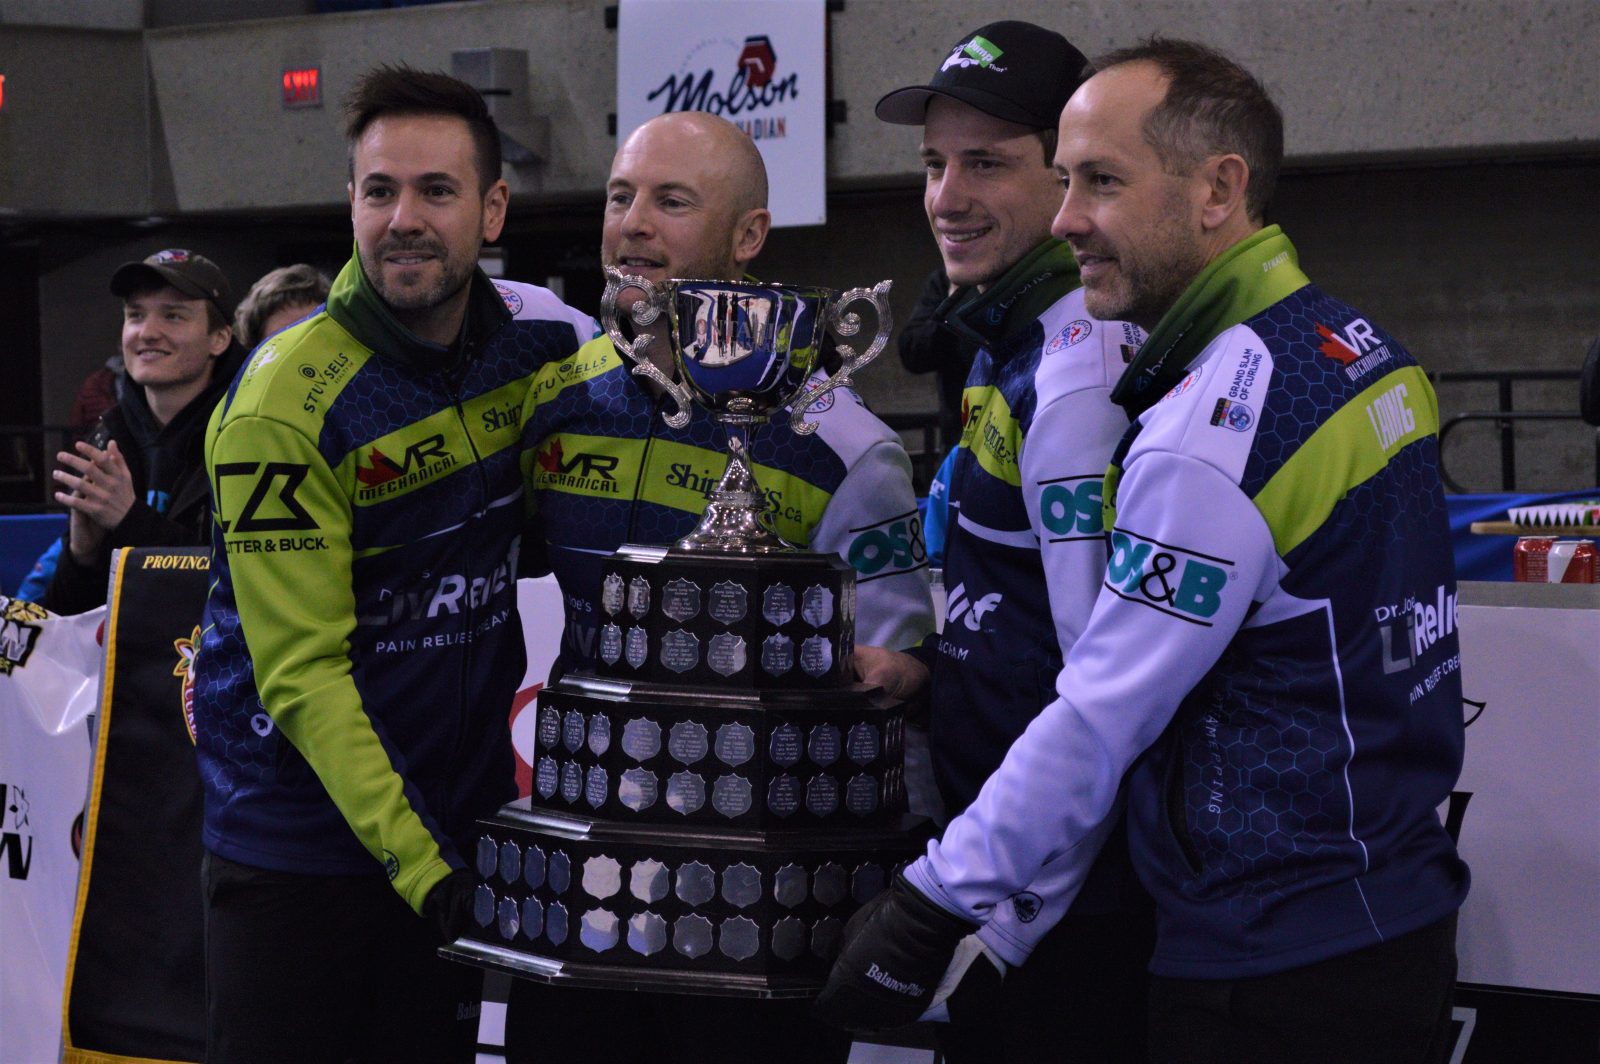 Cornwall’s Camm helps take trophy at Ontario Curling Championships